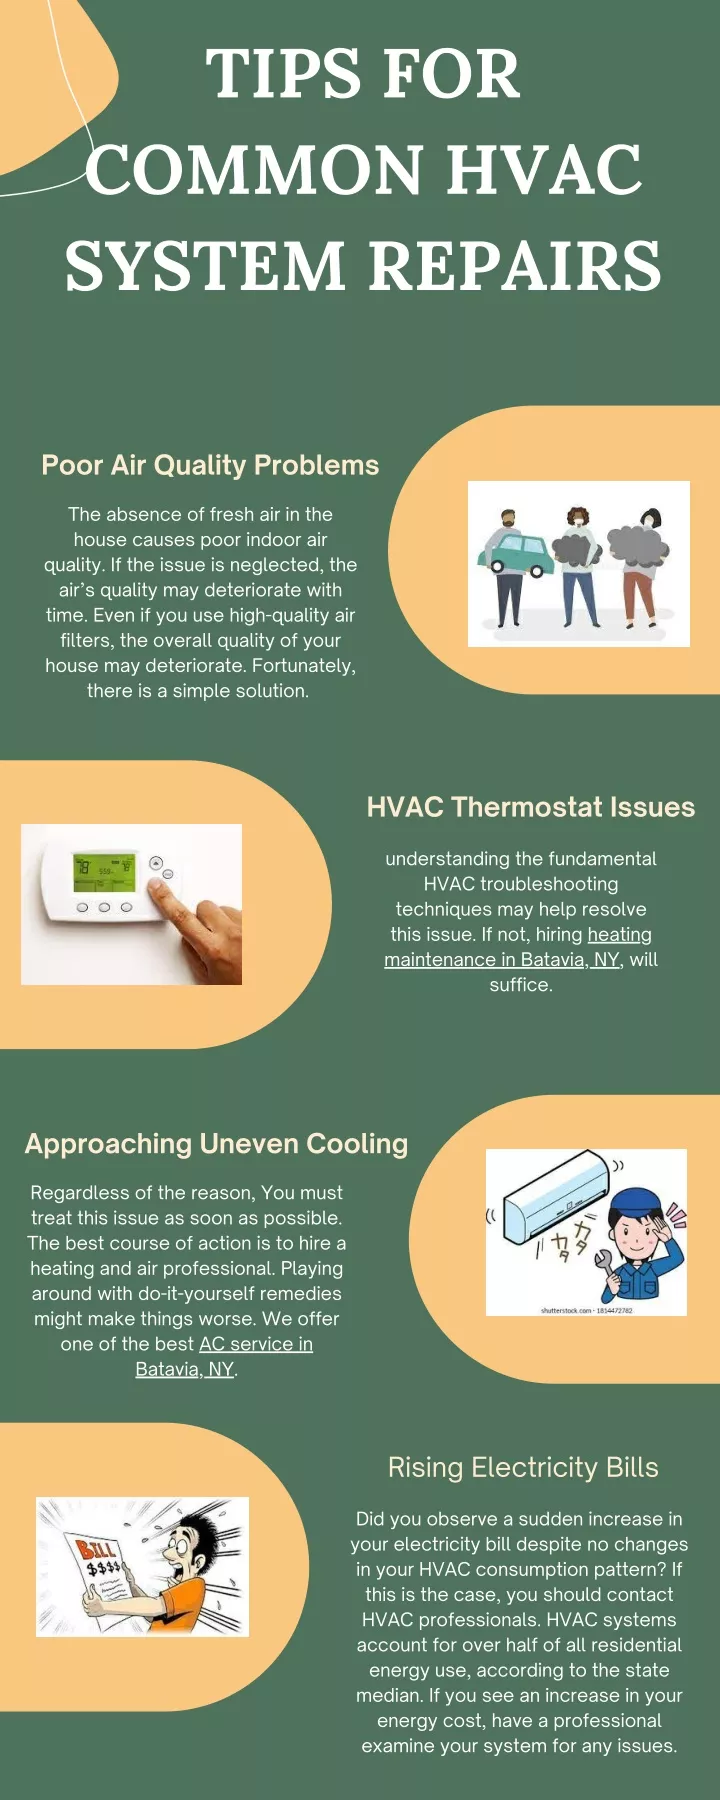 tips for common hvac system repairs